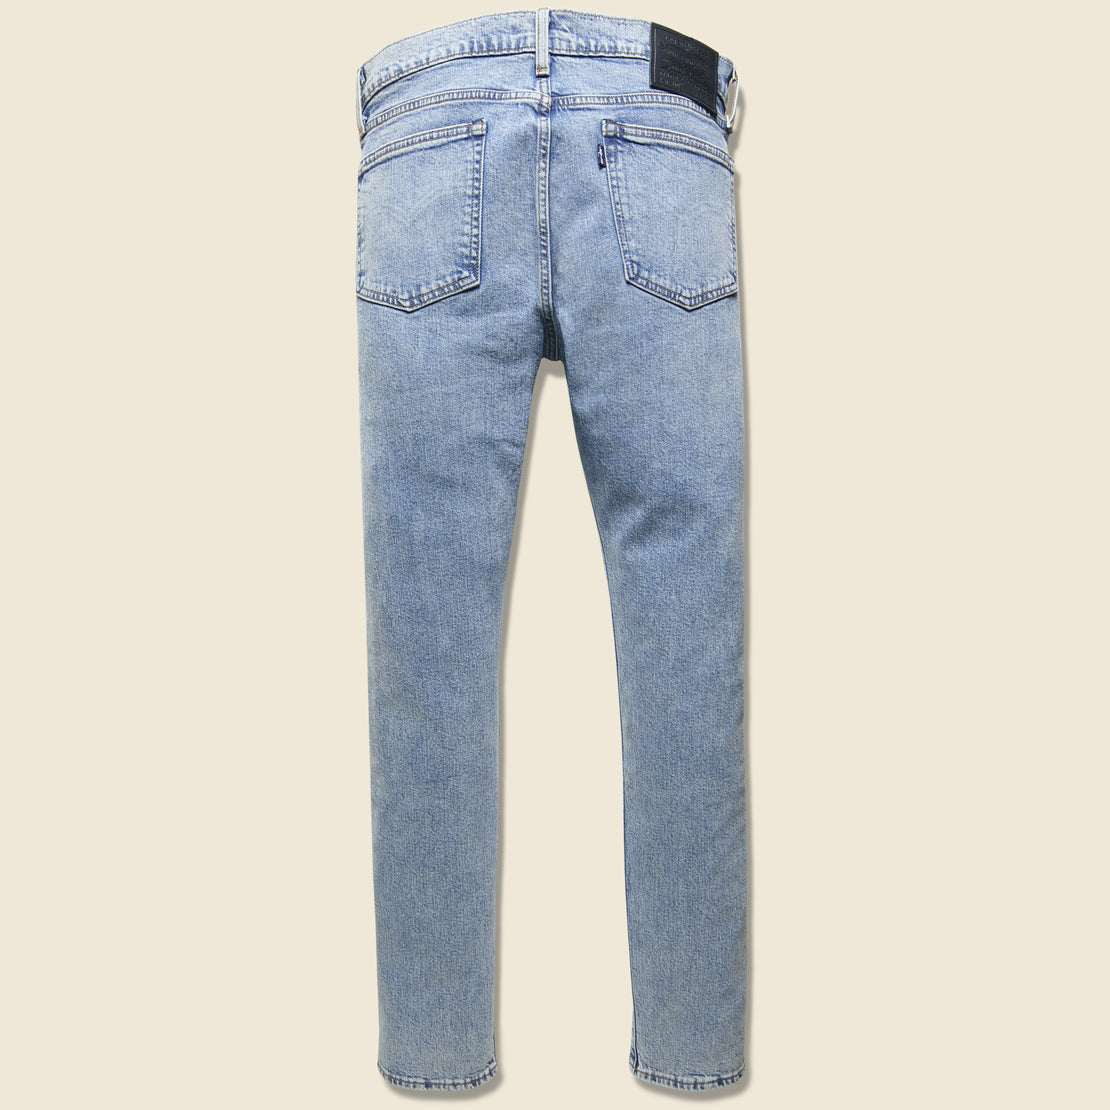 510 Skinny Jean - Westward Sun - Levis Made & Crafted - STAG Provisions - Pants - Denim